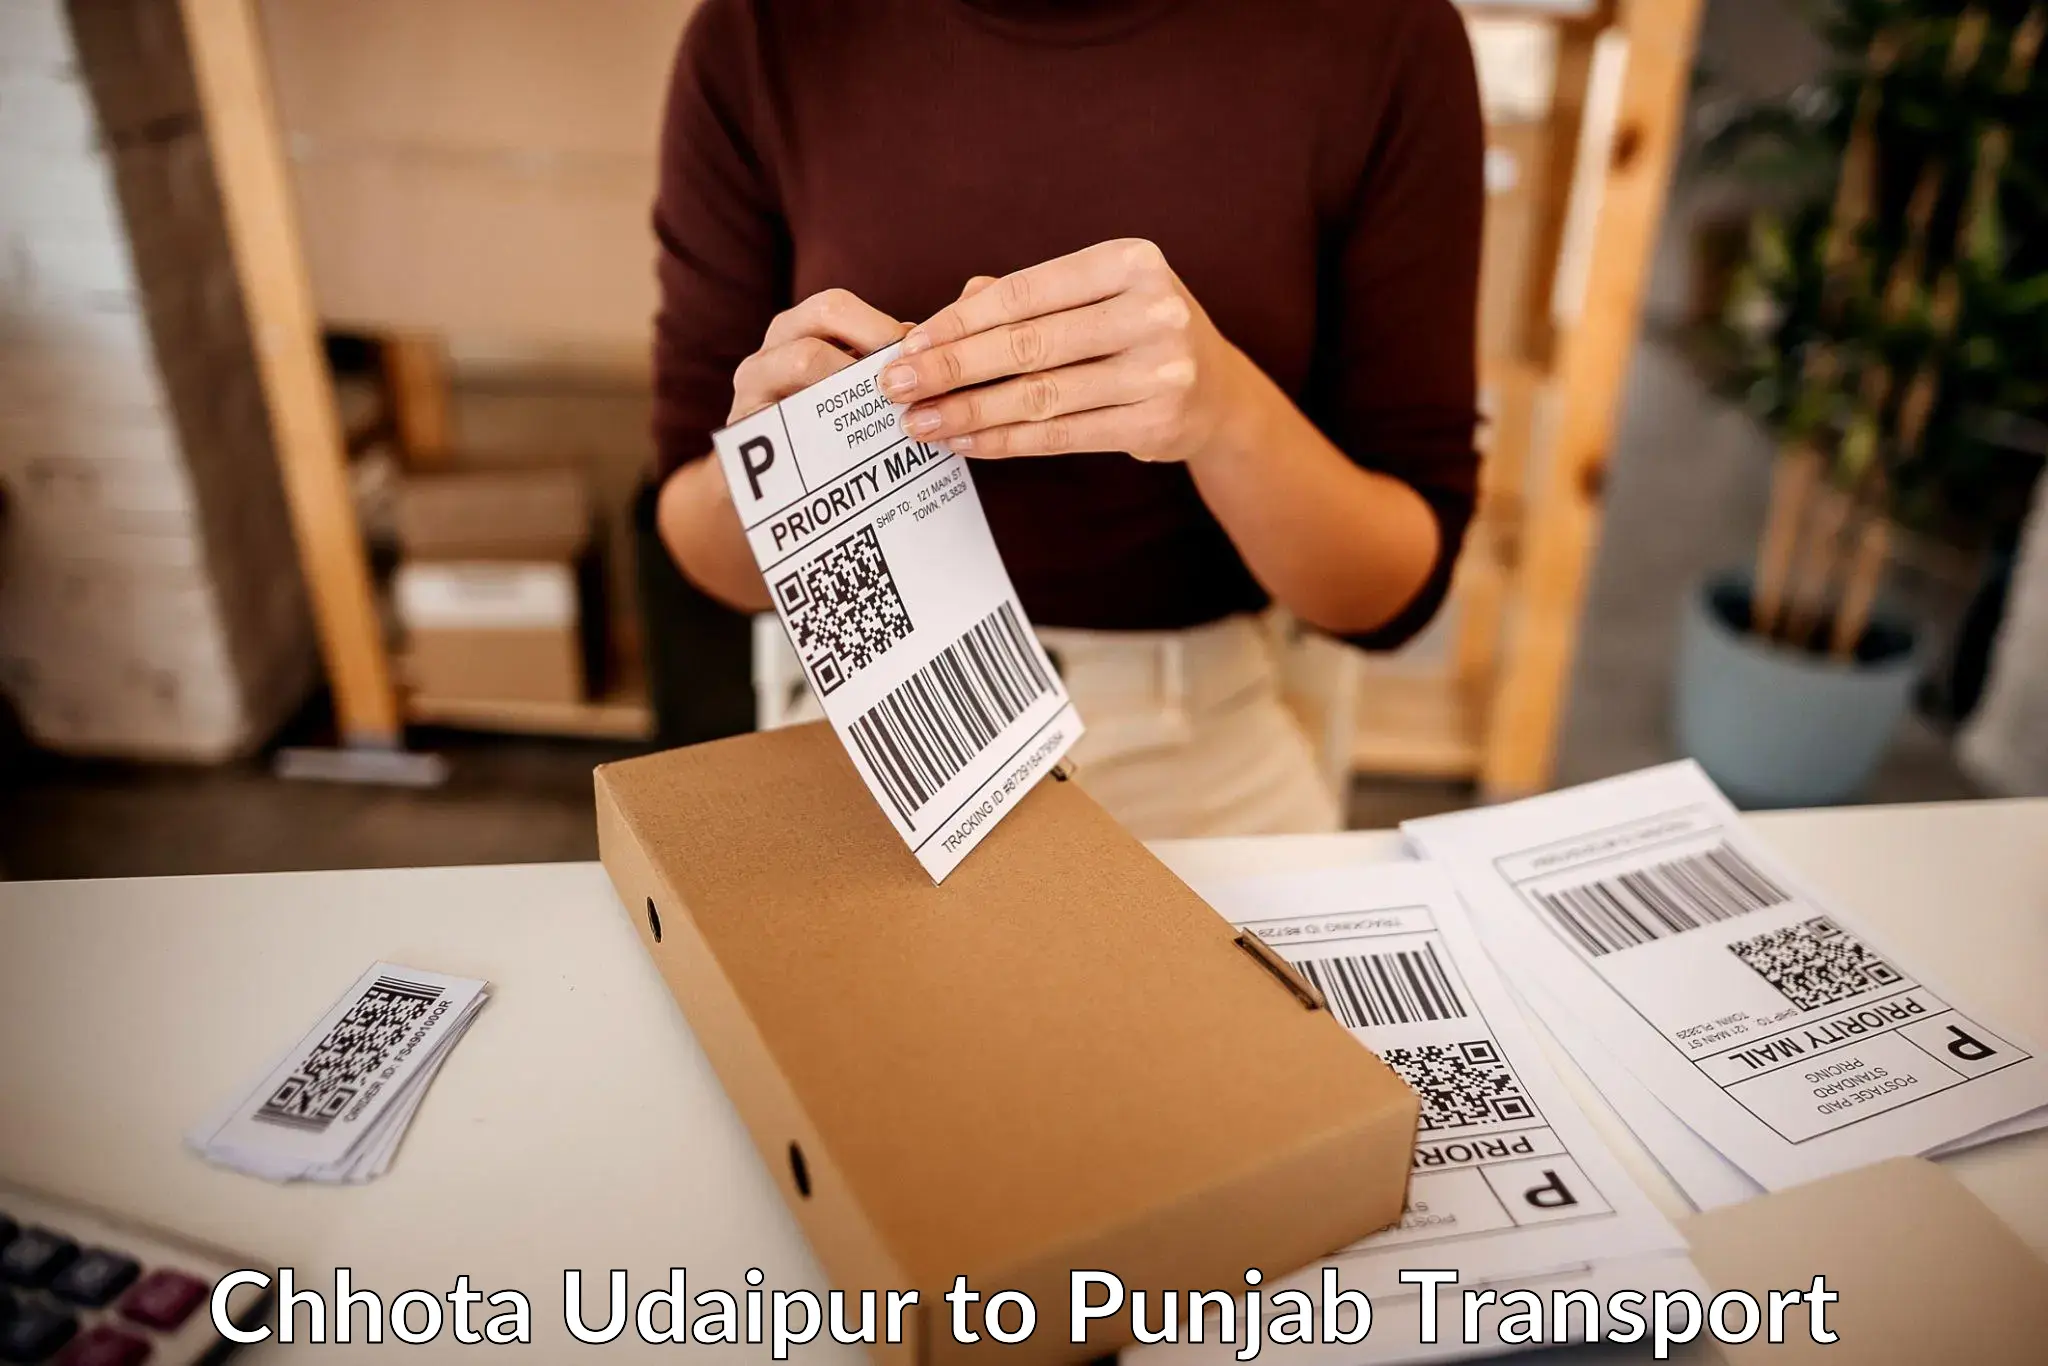 Parcel transport services Chhota Udaipur to Mohali